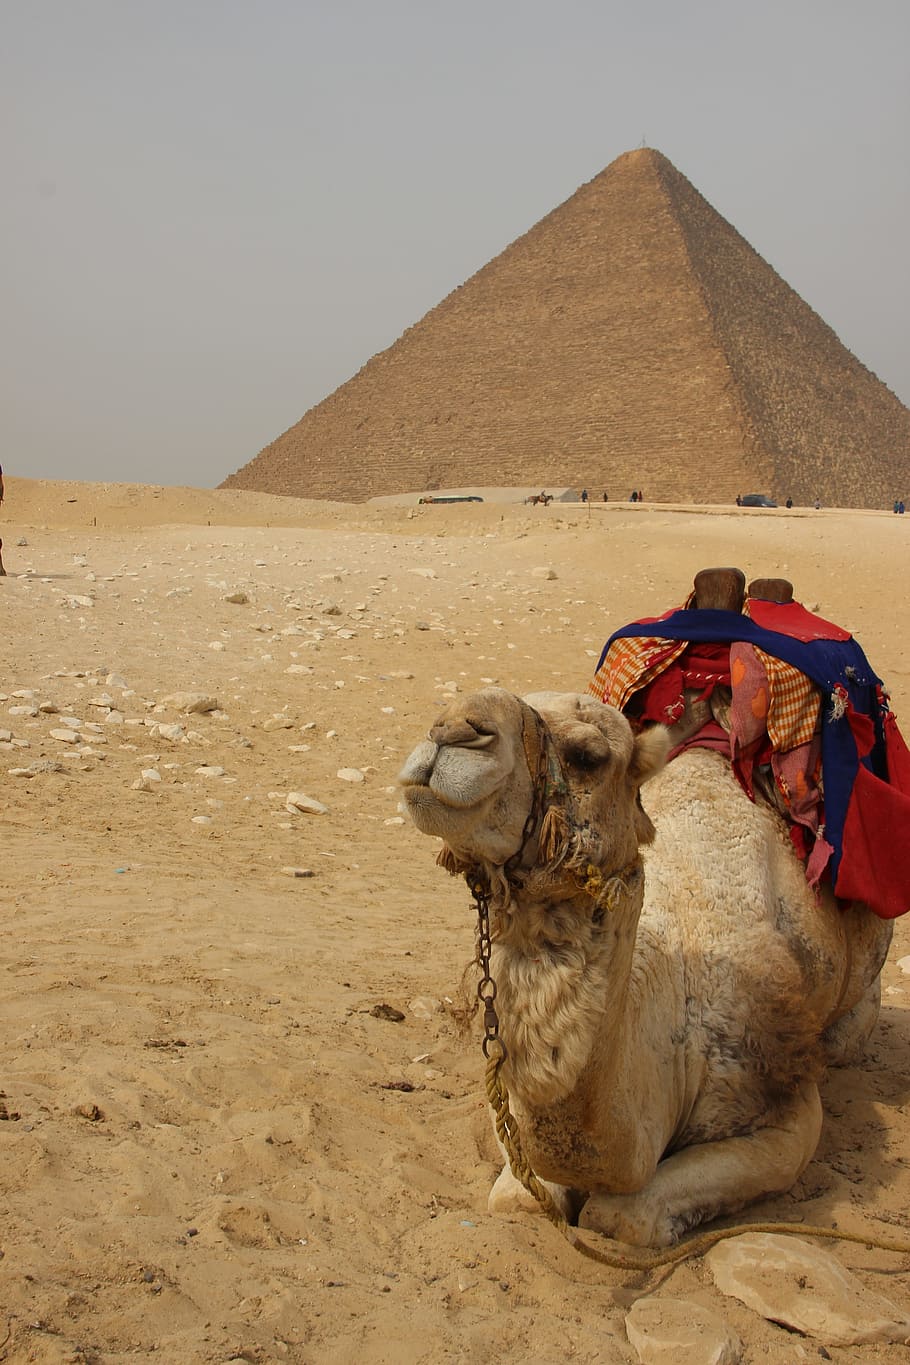 brown camel lying on the sand, Egypt, Africa, Pyramid, traveling, HD wallpaper